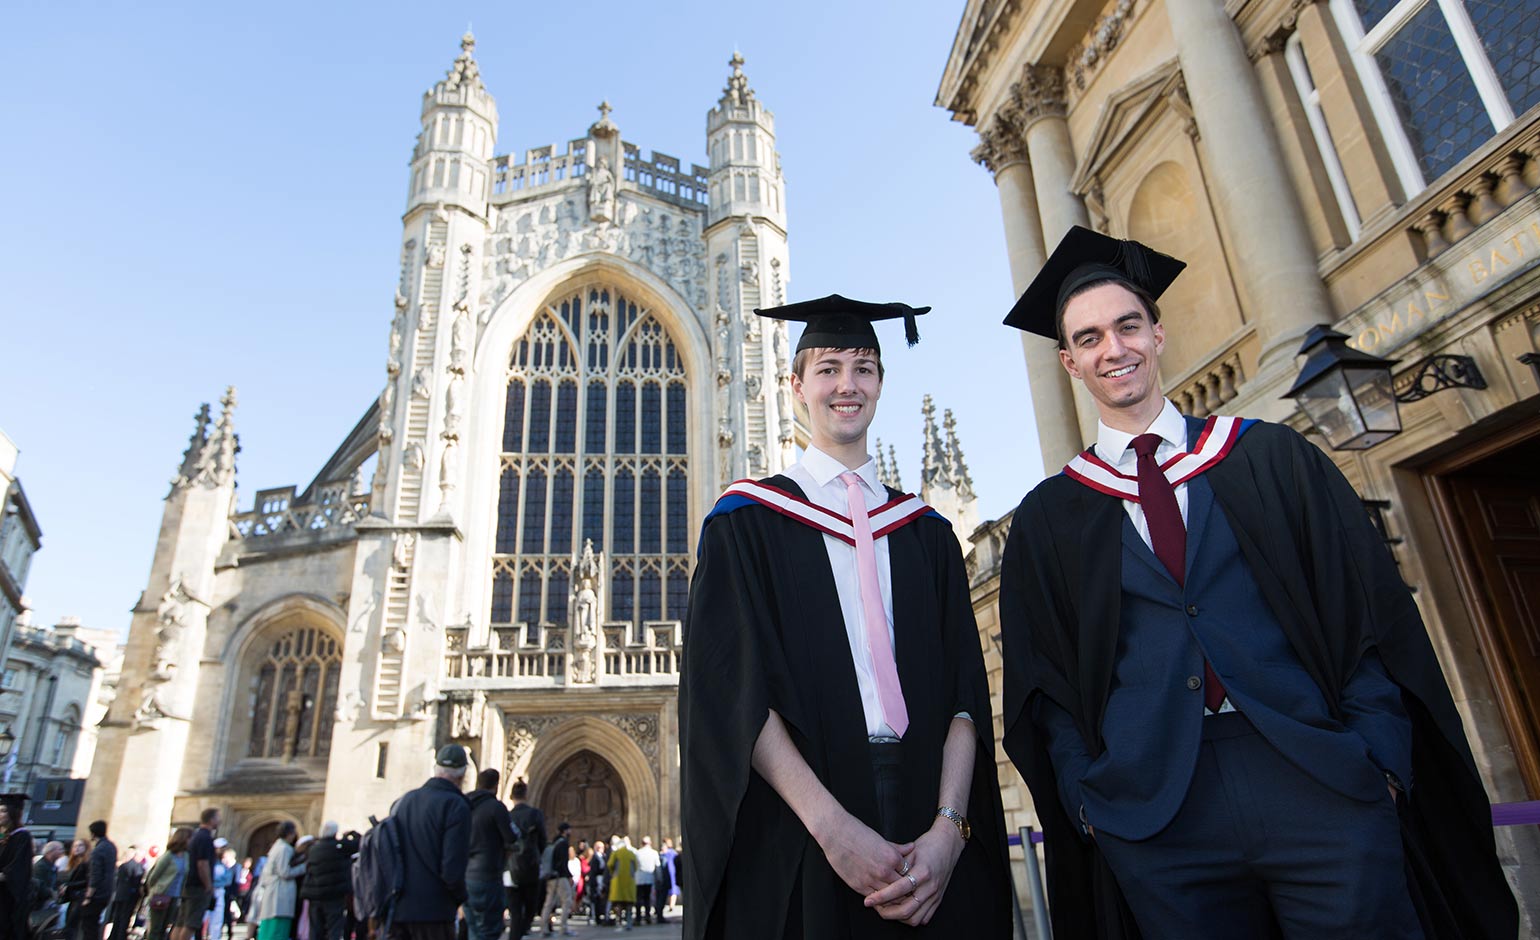 Prince Edward reappointed as University of Bath chancellor - Bath Chronicle